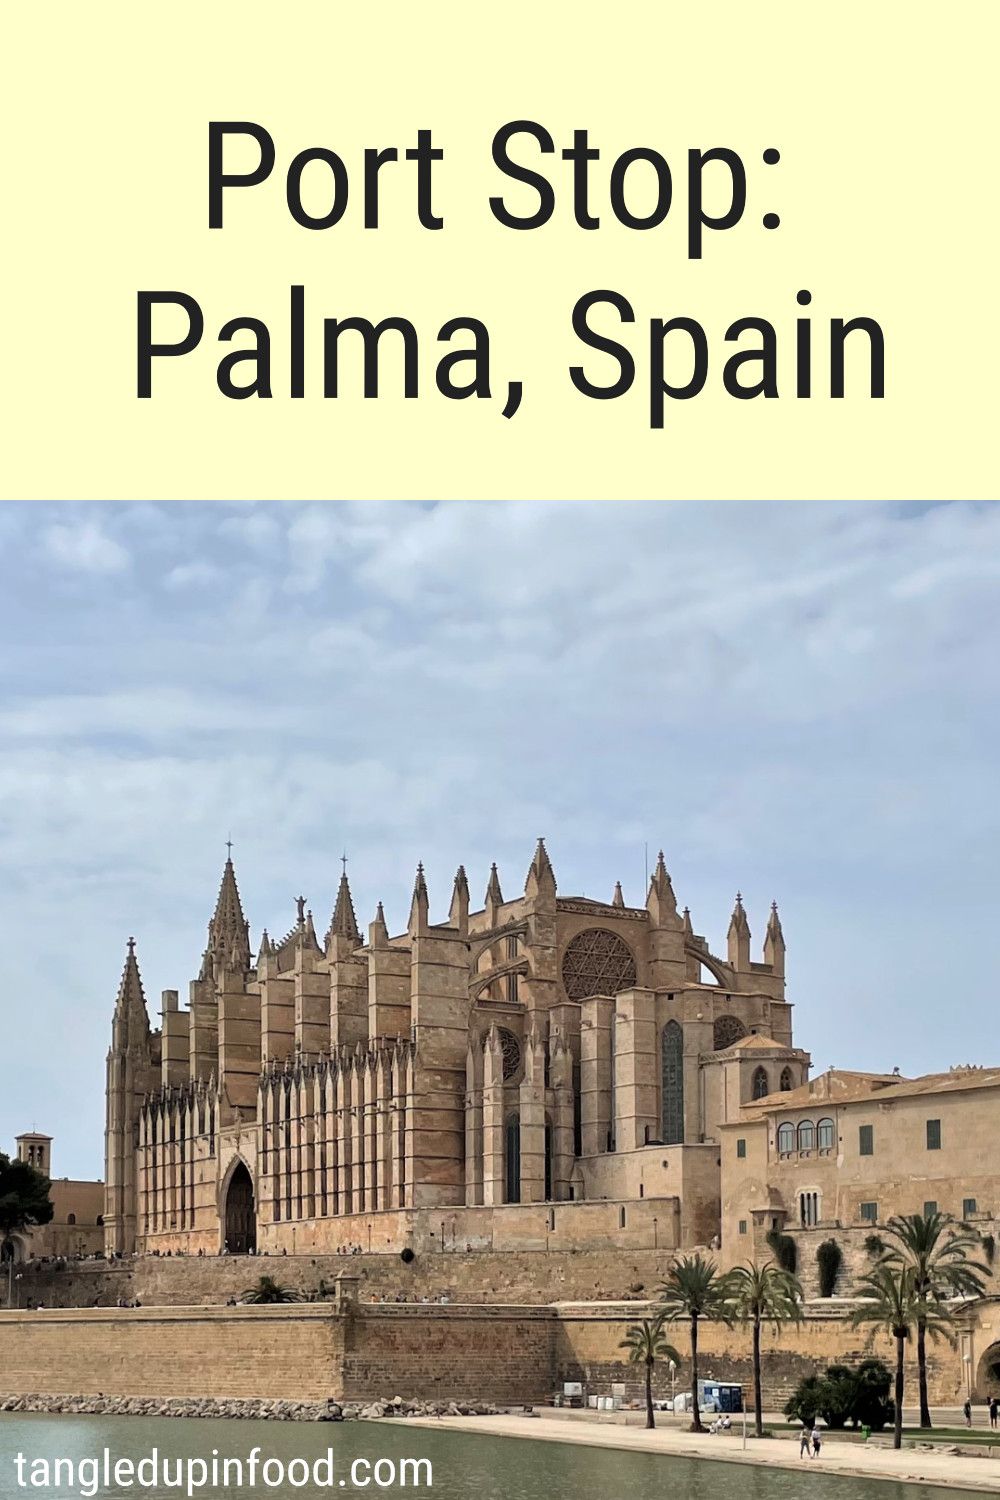 Photo of ornate cathedral with text reading "Port Stop: Palma, Spain" 